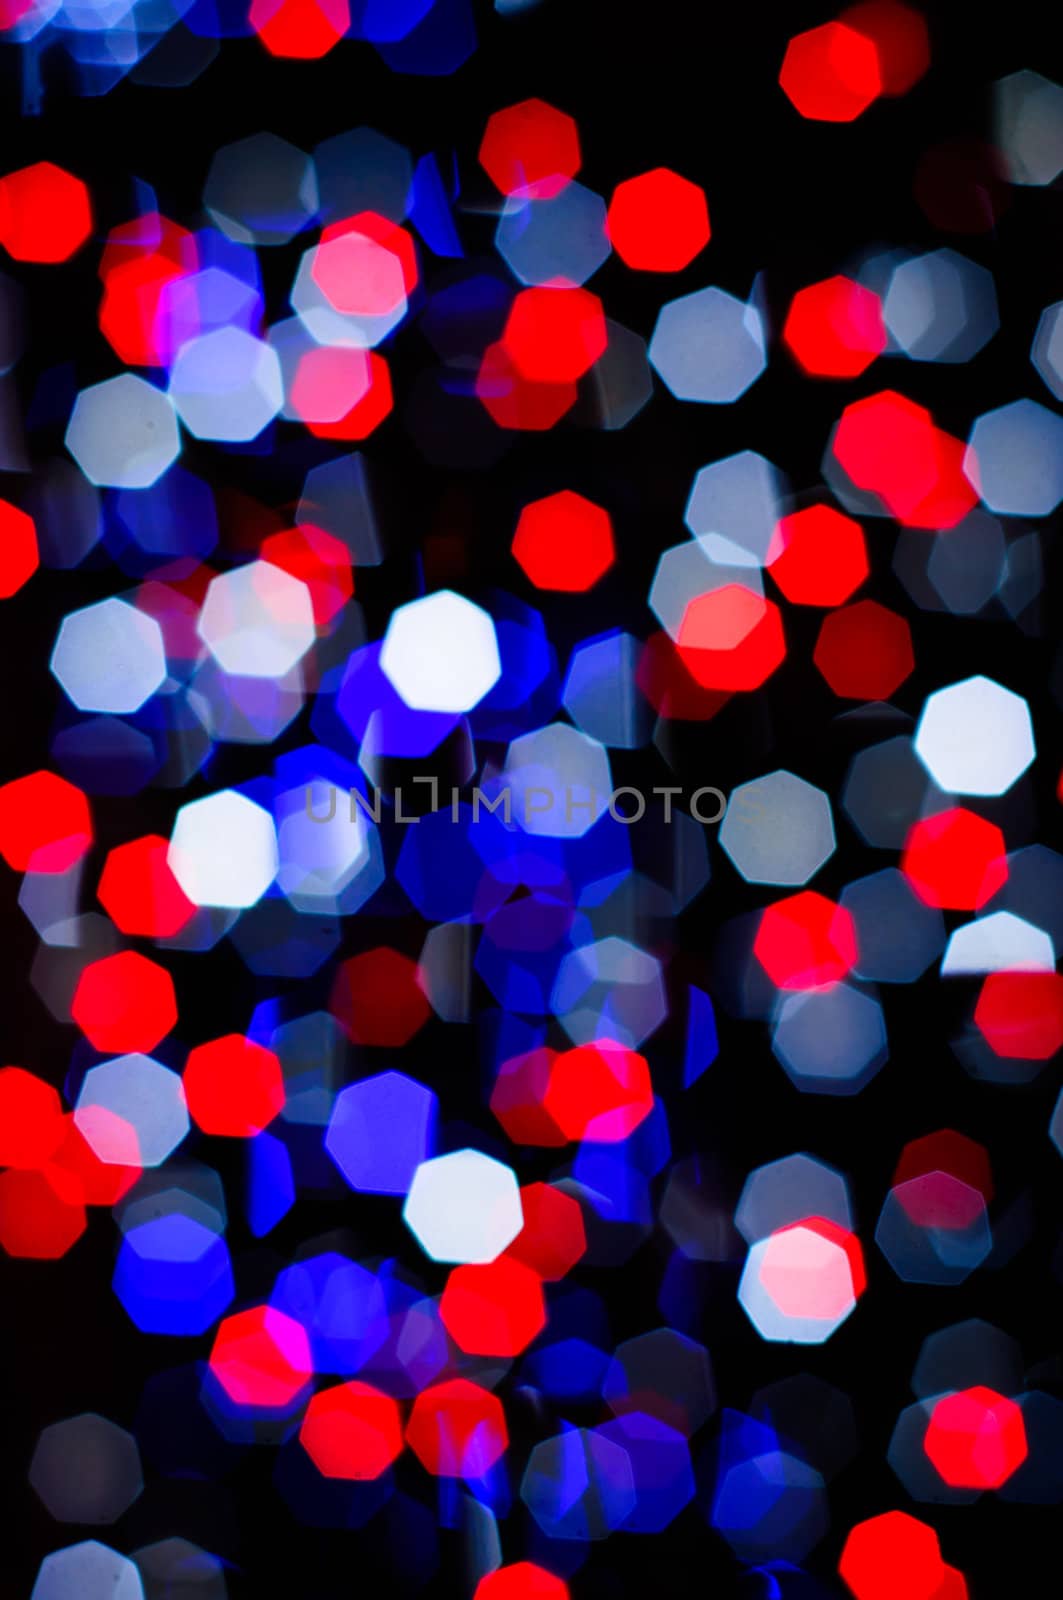 Abstract out of focus background